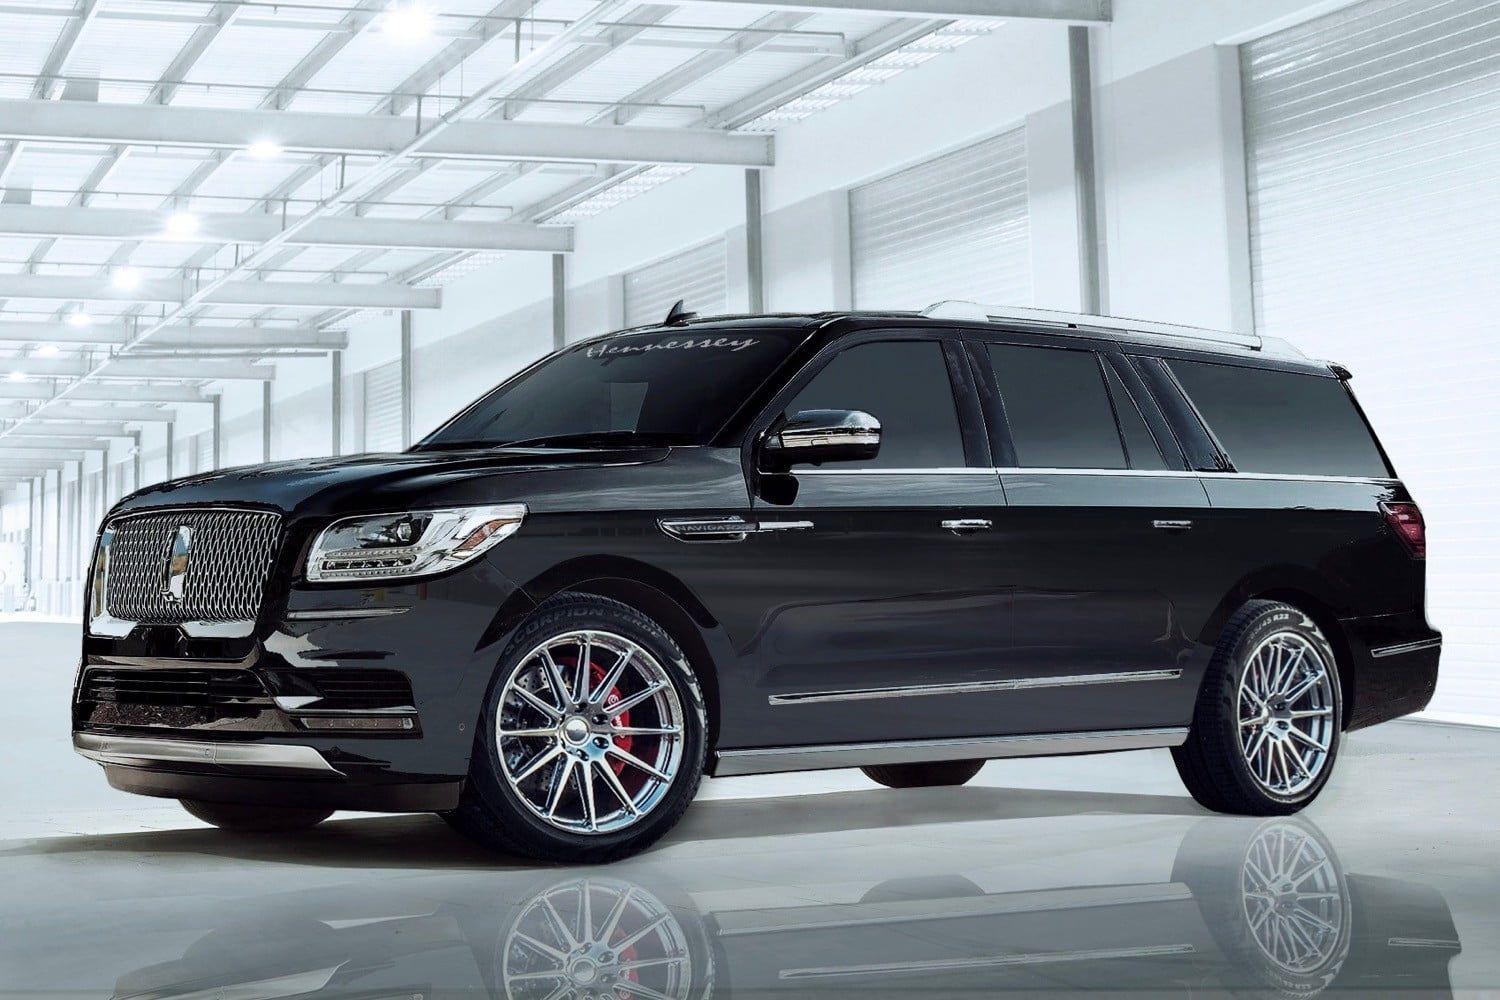 Hennessy Car Company Logo - Hennessey Performance Engineering Builds 600-HP Lincoln Navigator ...